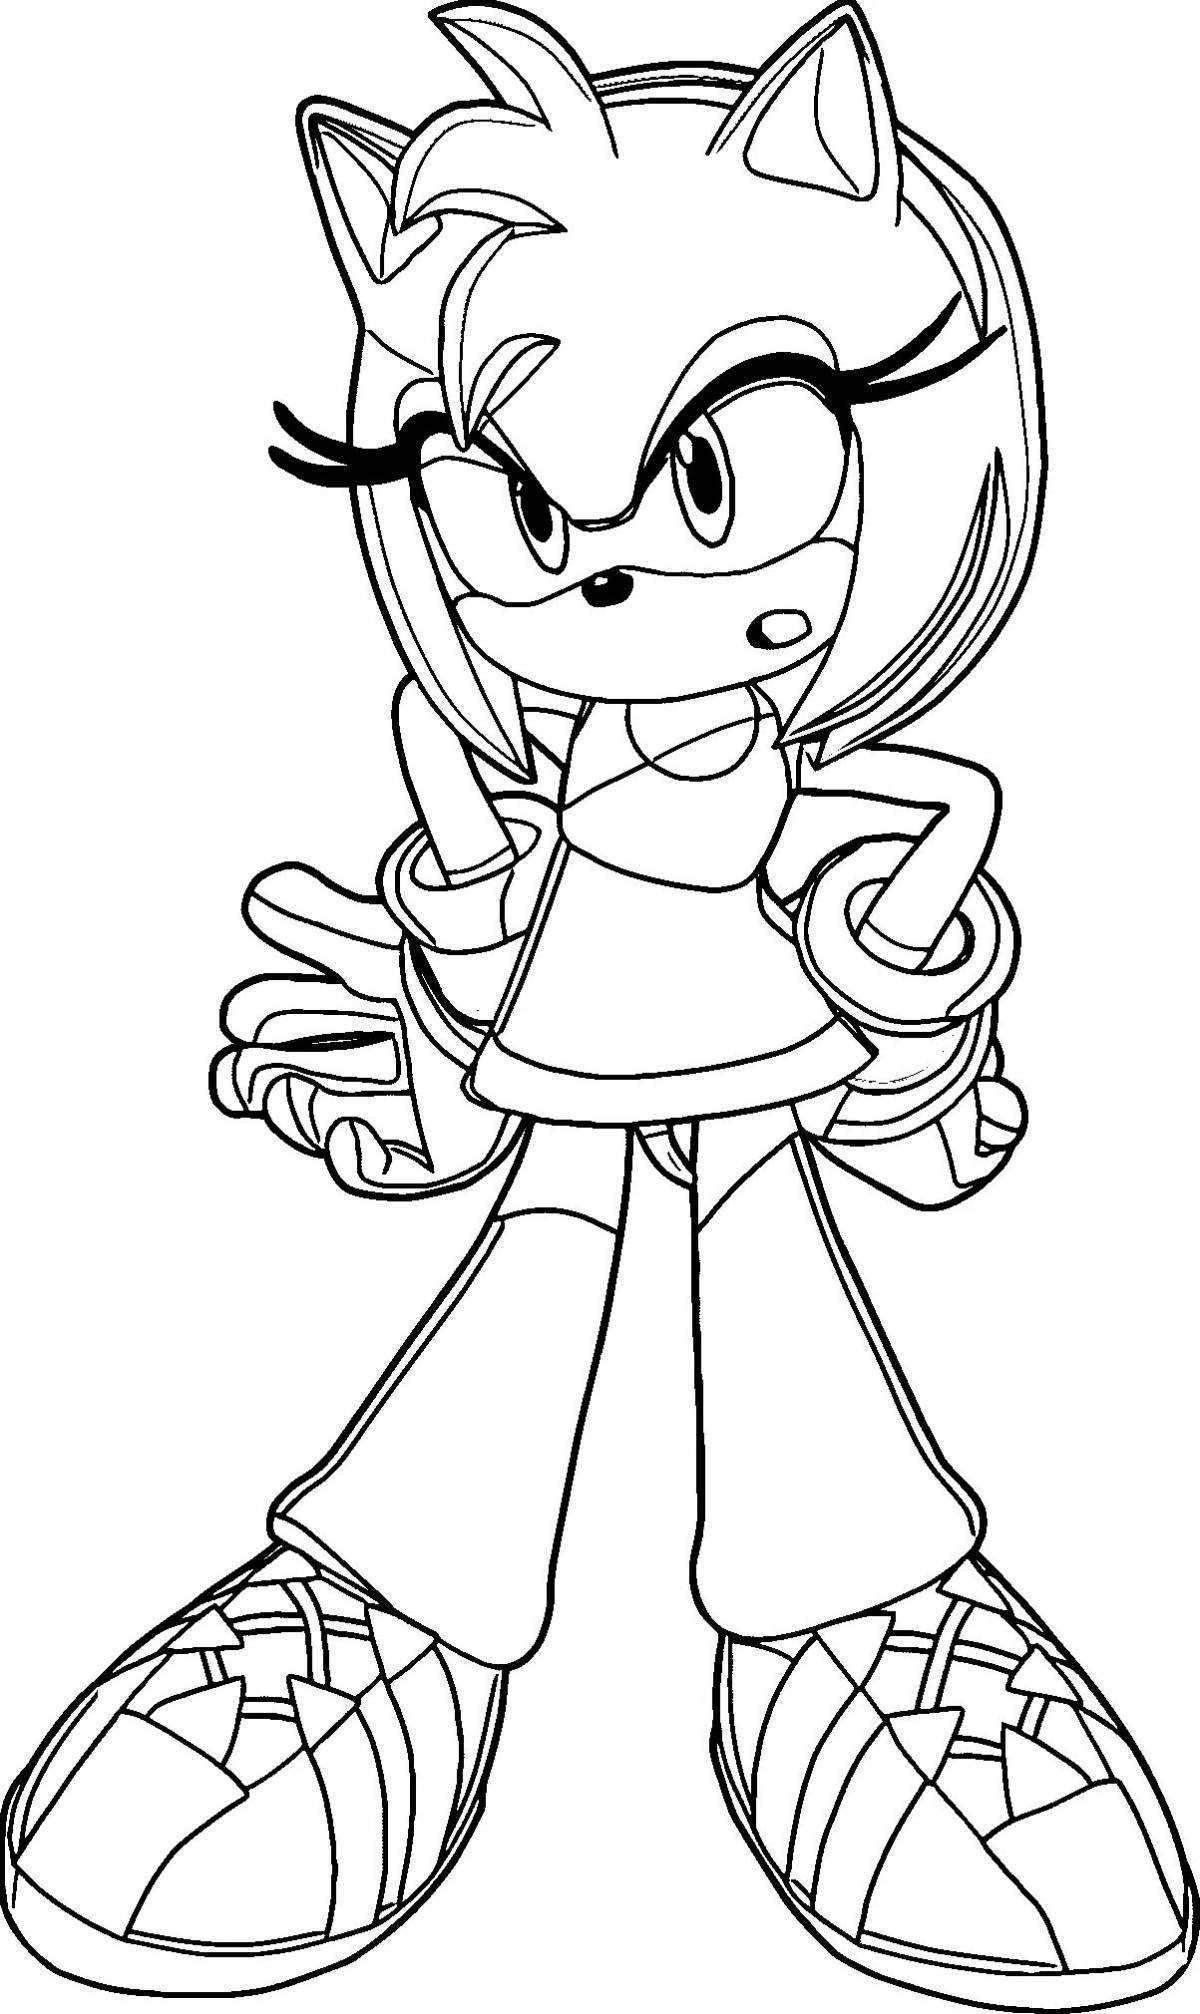 Colorful amy coloring page